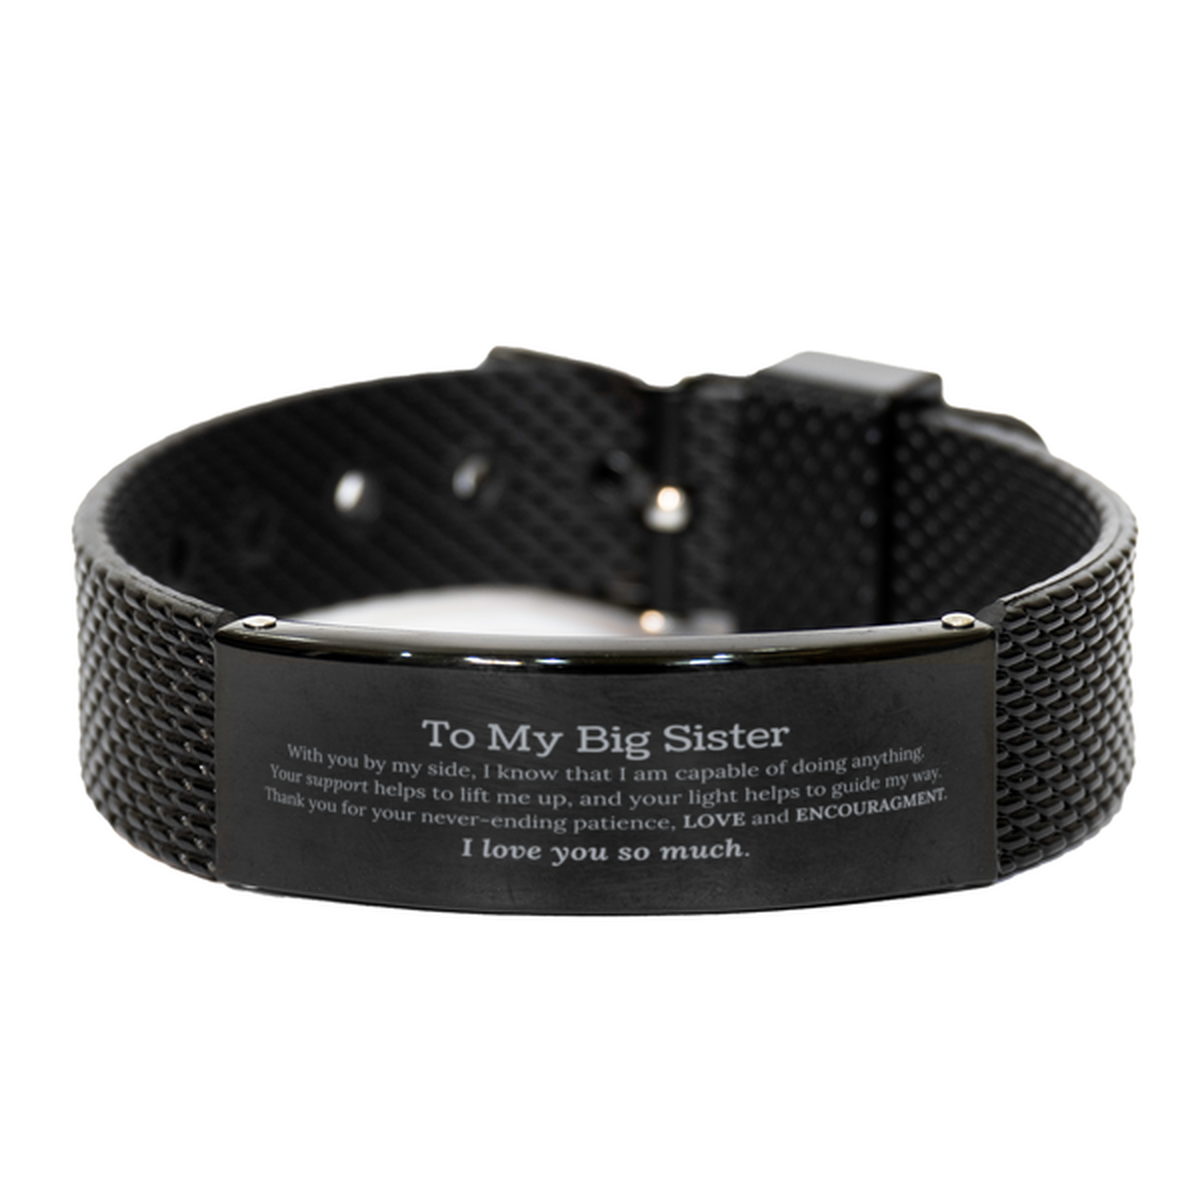 Appreciation Big Sister Black Shark Mesh Bracelet Gifts, To My Big Sister Birthday Christmas Wedding Keepsake Gifts for Big Sister With you by my side, I know that I am capable of doing anything. I love you so much